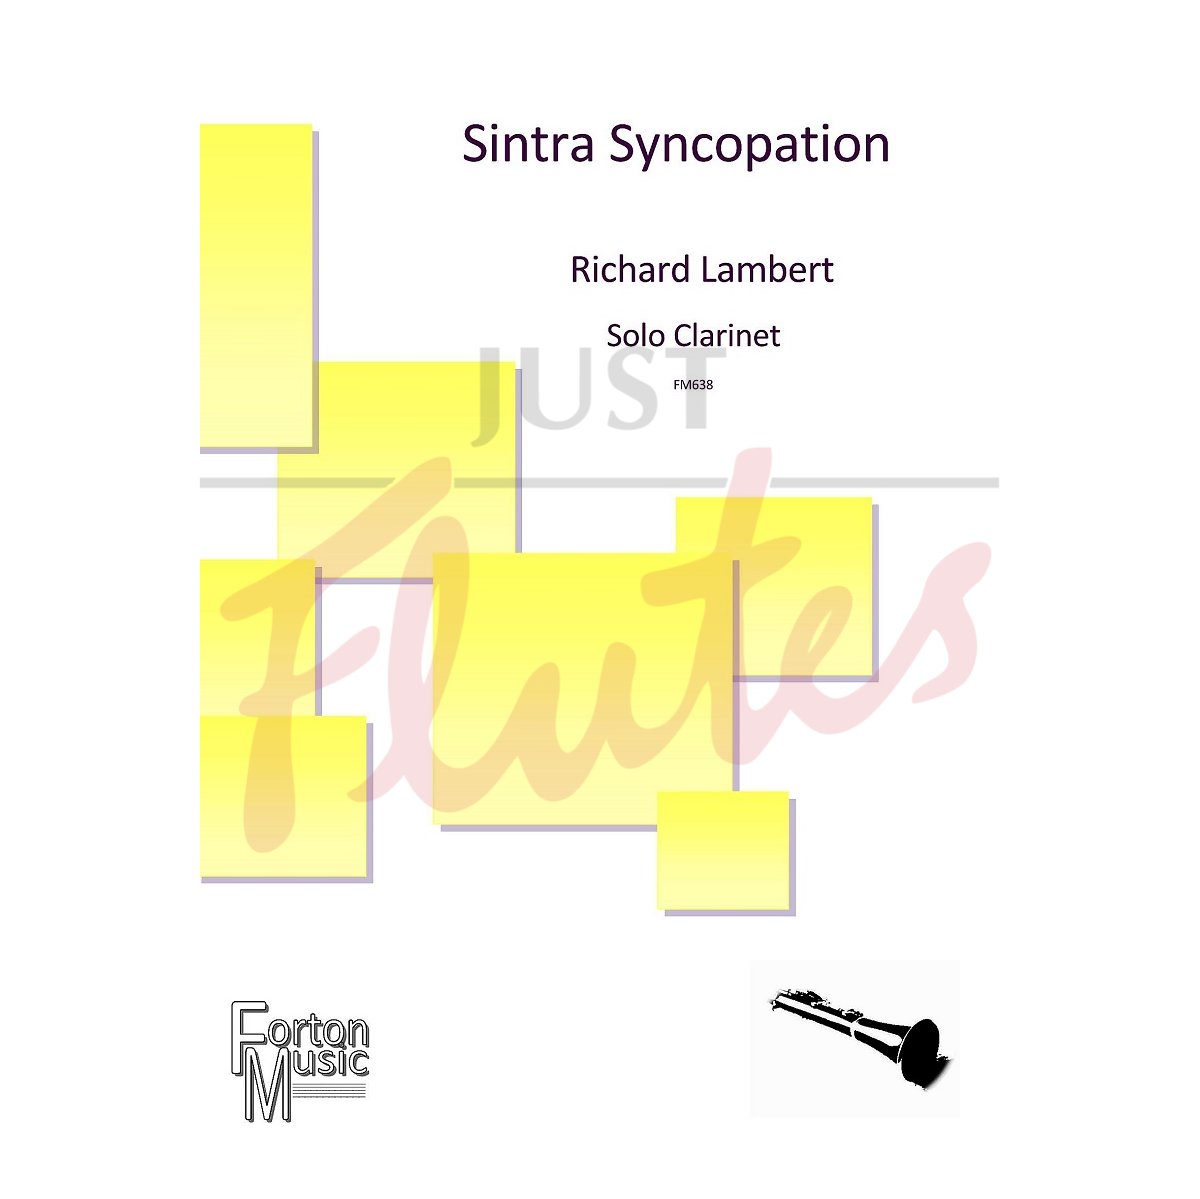 Sintra Syncopations